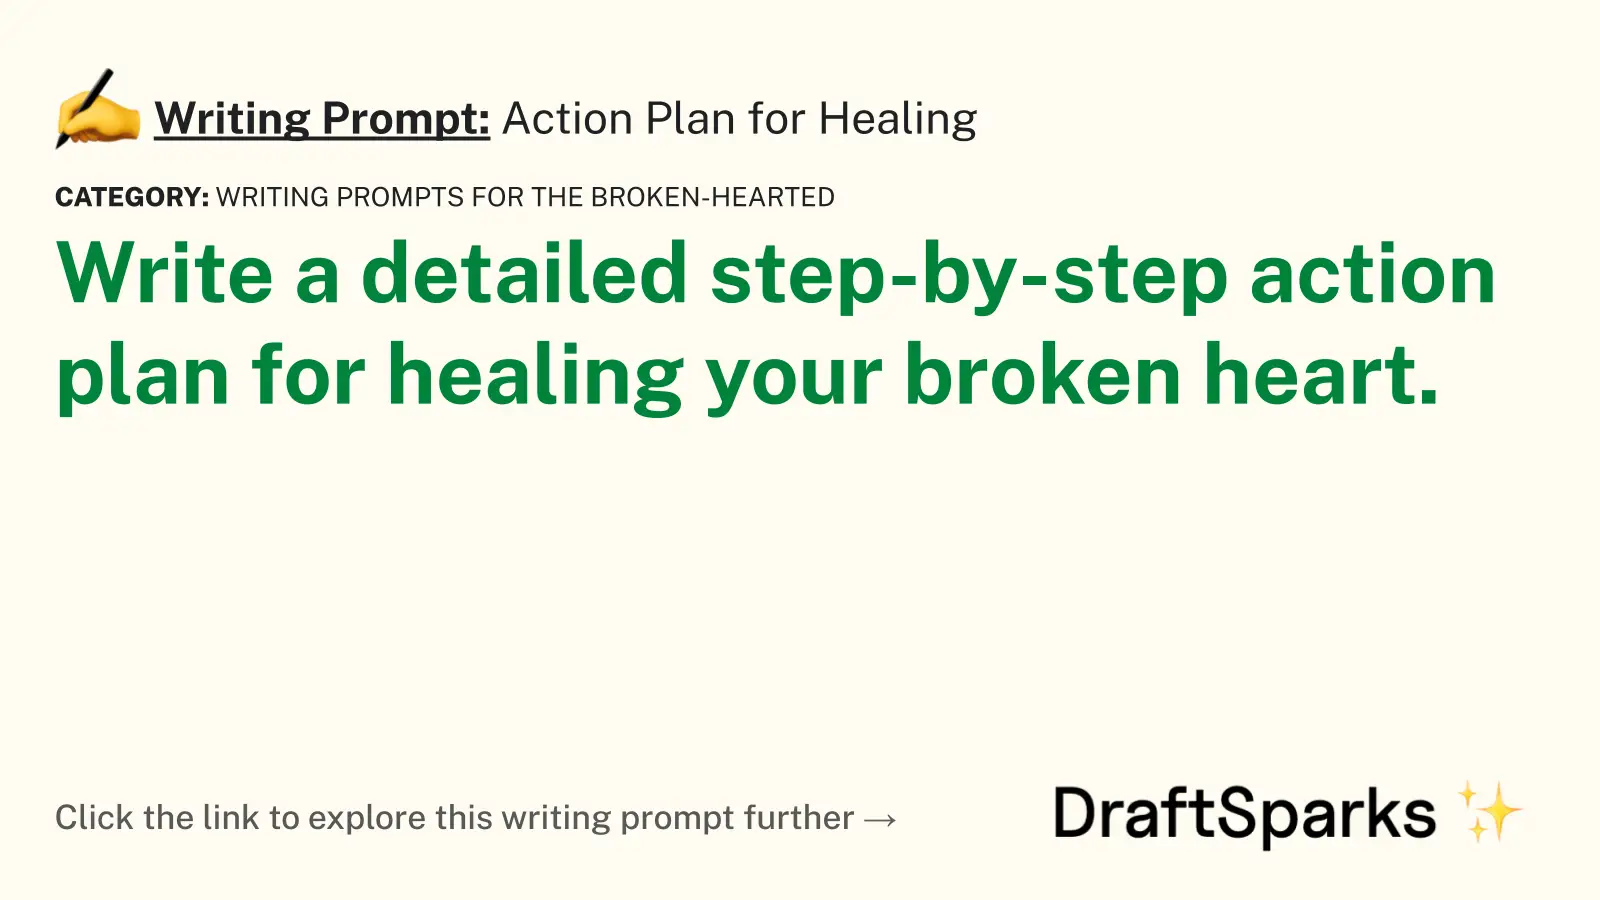 Action Plan for Healing